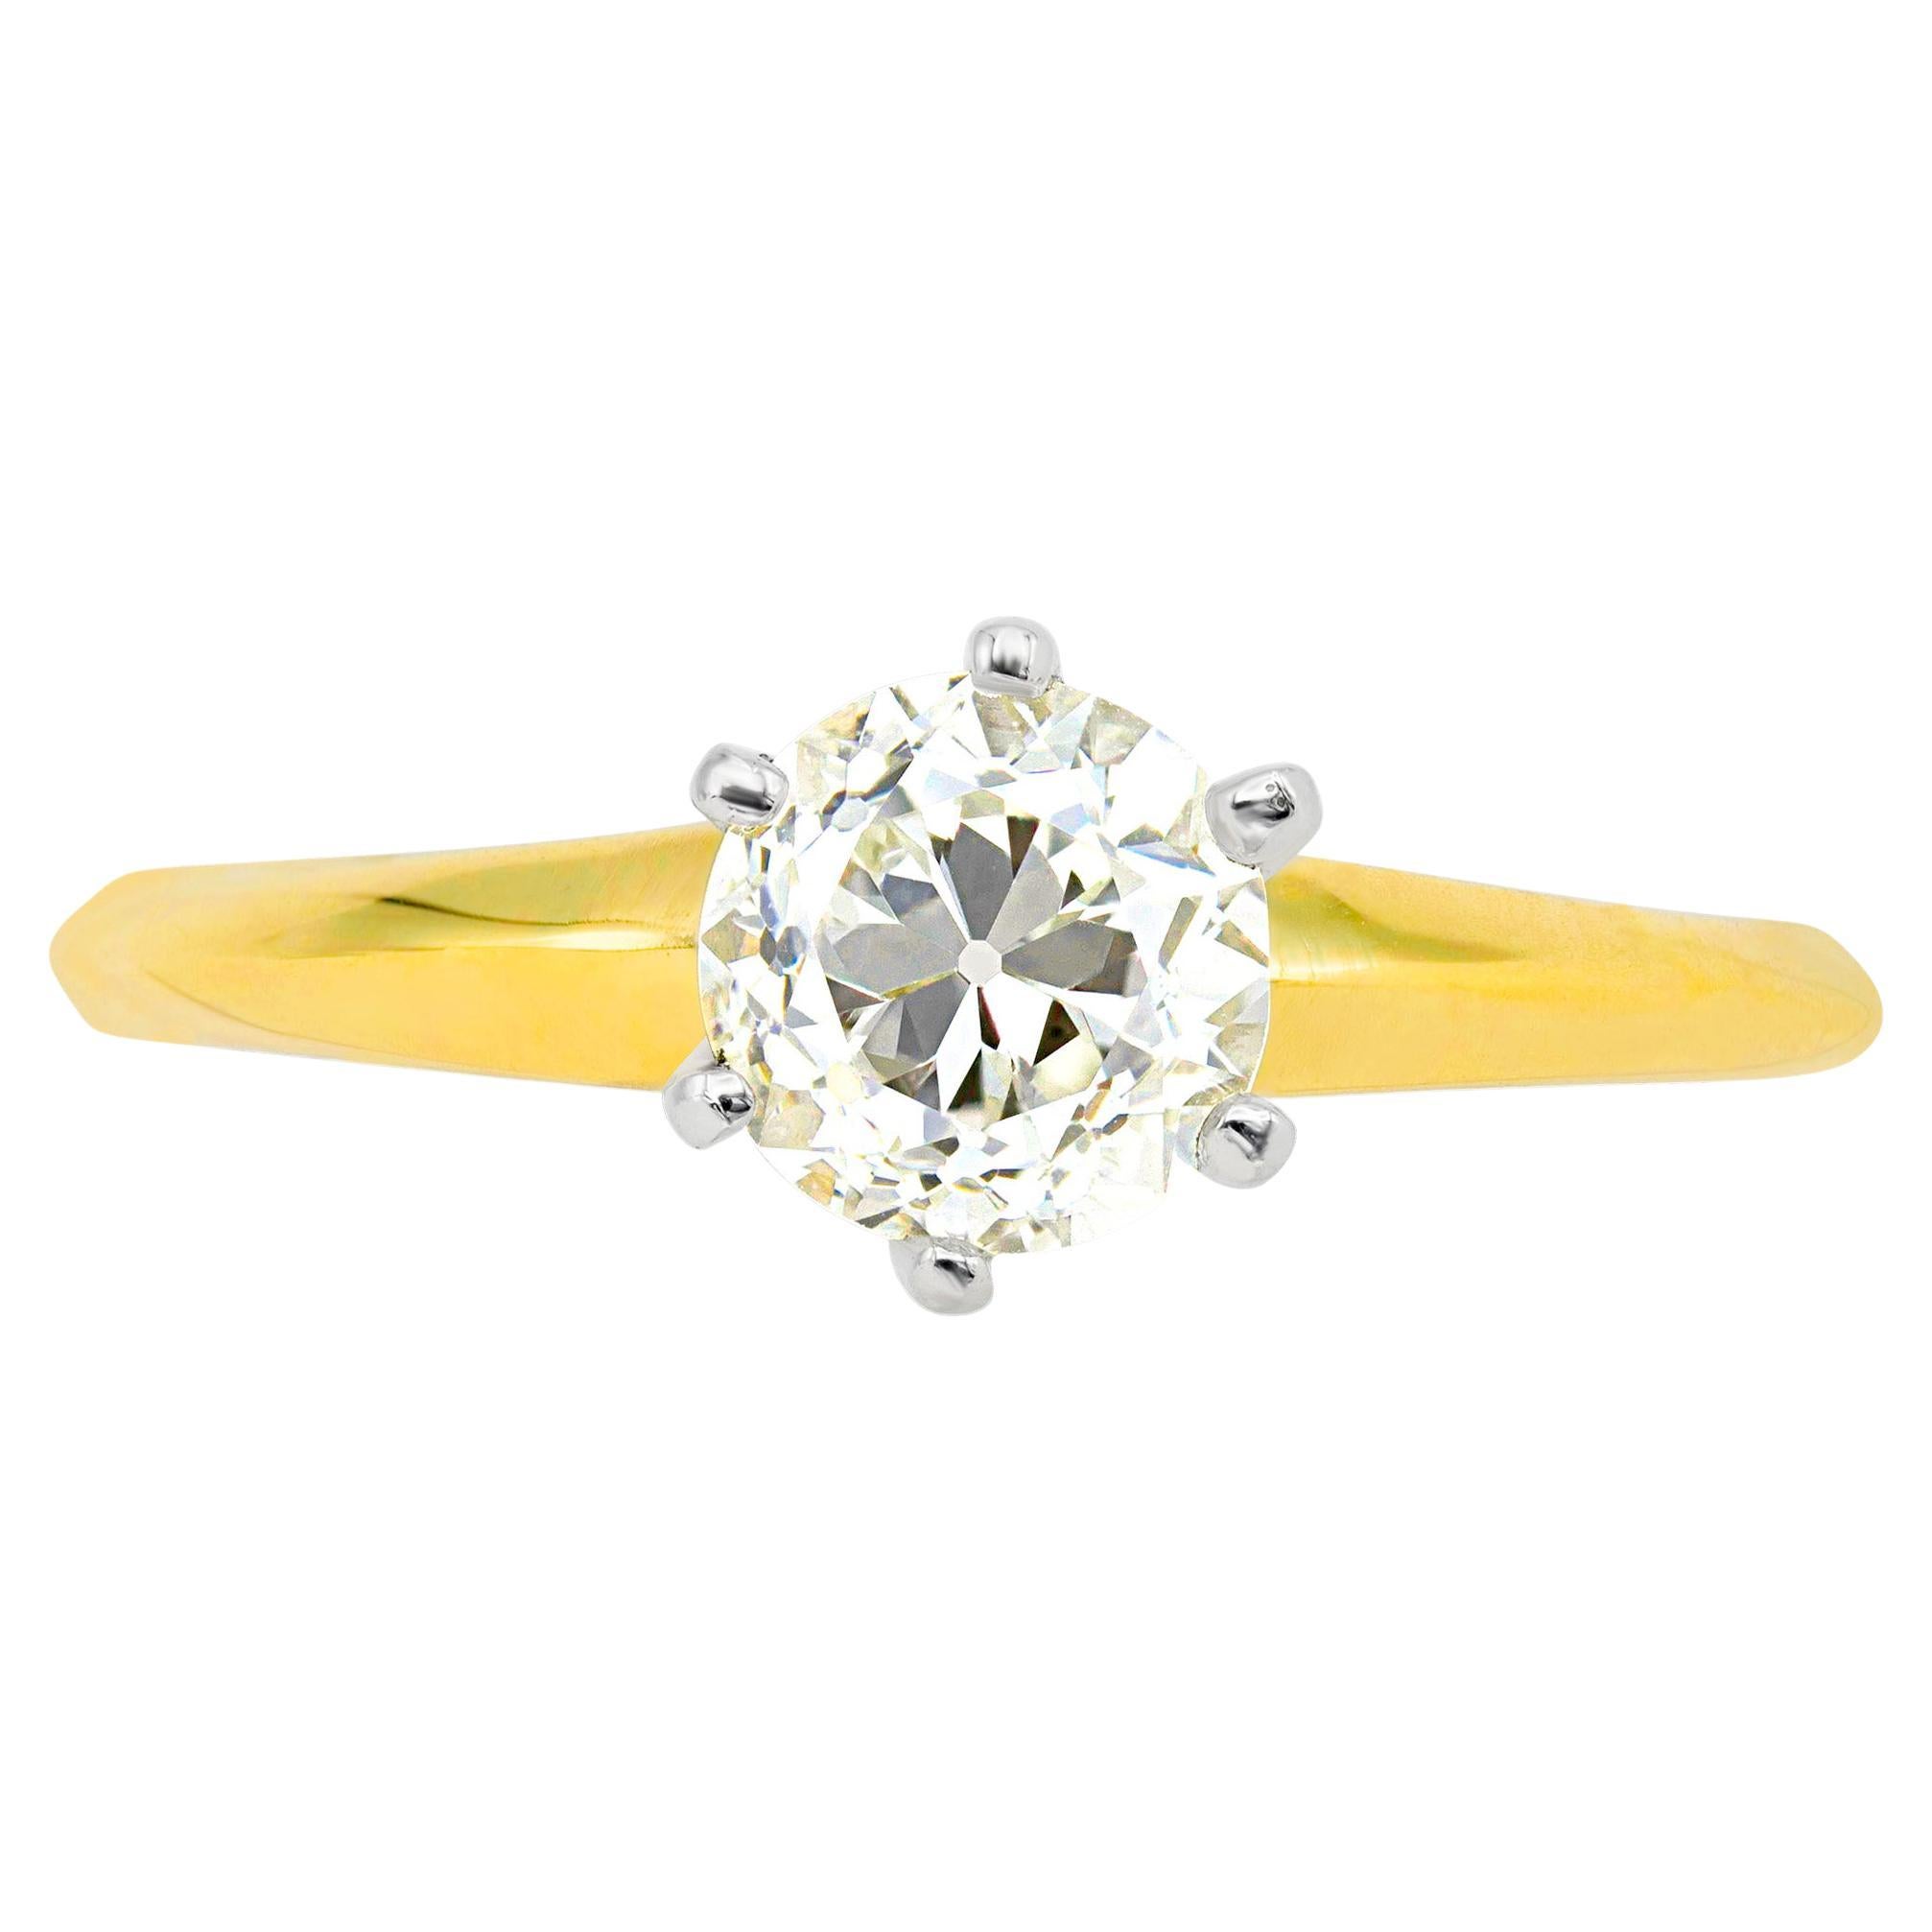 Tiffany & Co. 0.73 Ct. Solitaire Engagement Ring GIA Certified E VS1